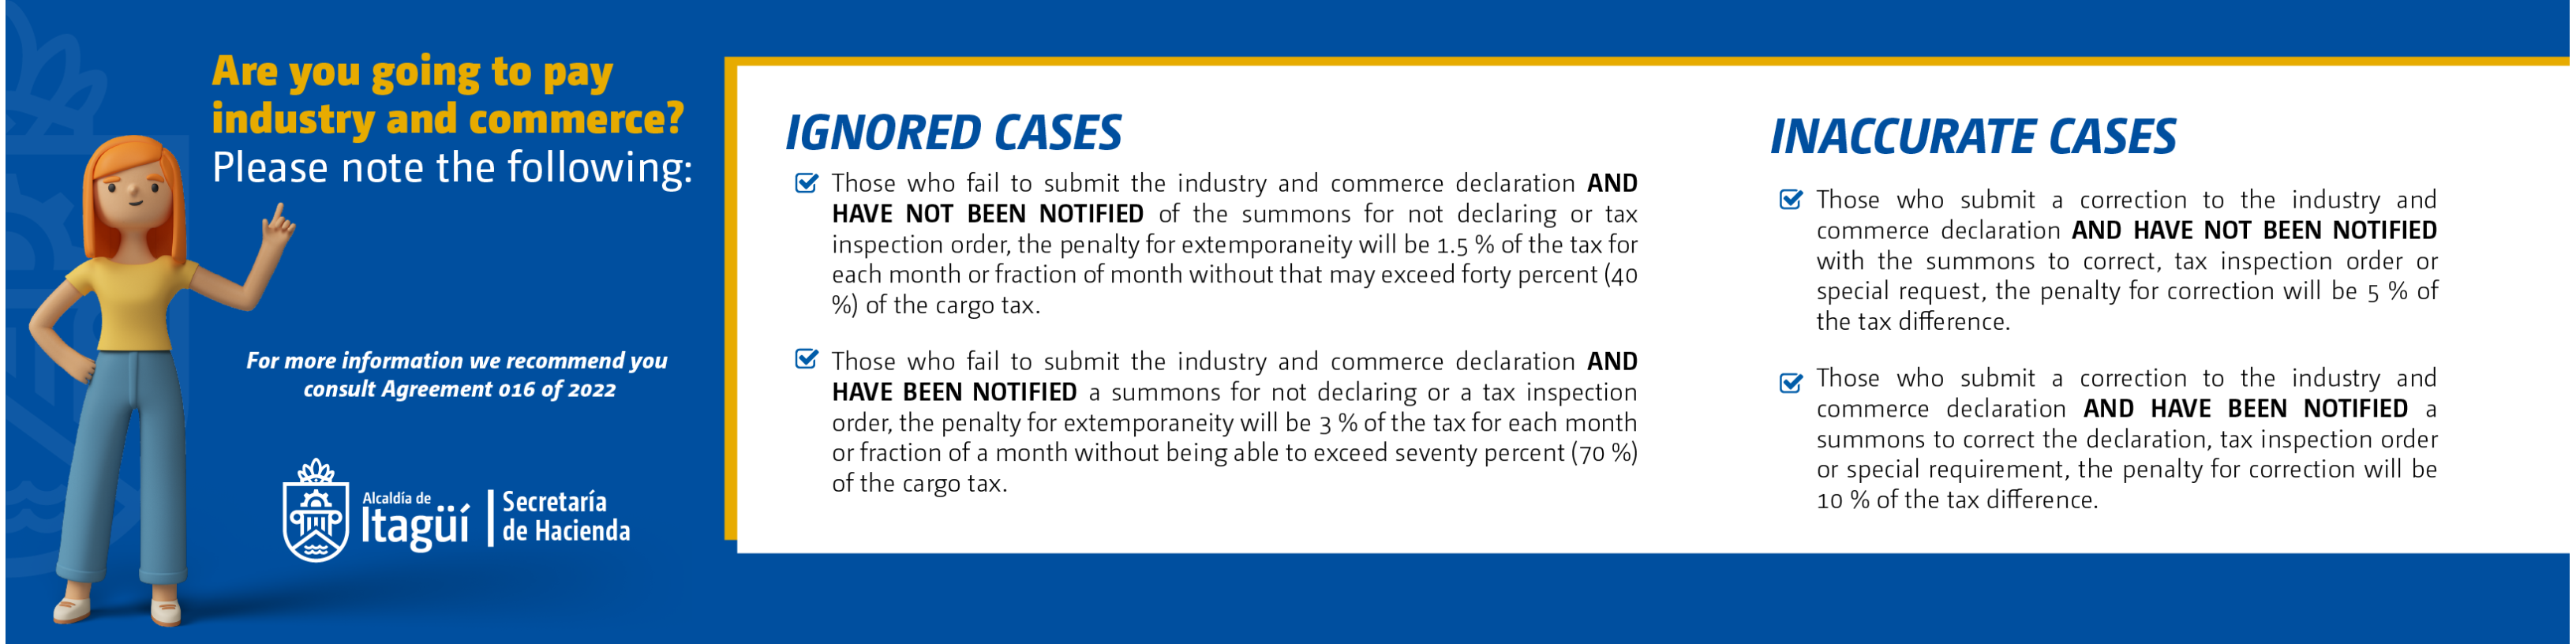 In this banner you will find information on inaccurate cases and omitted cases when paying for industry and commerce. Consult agreement 016 of 2022.